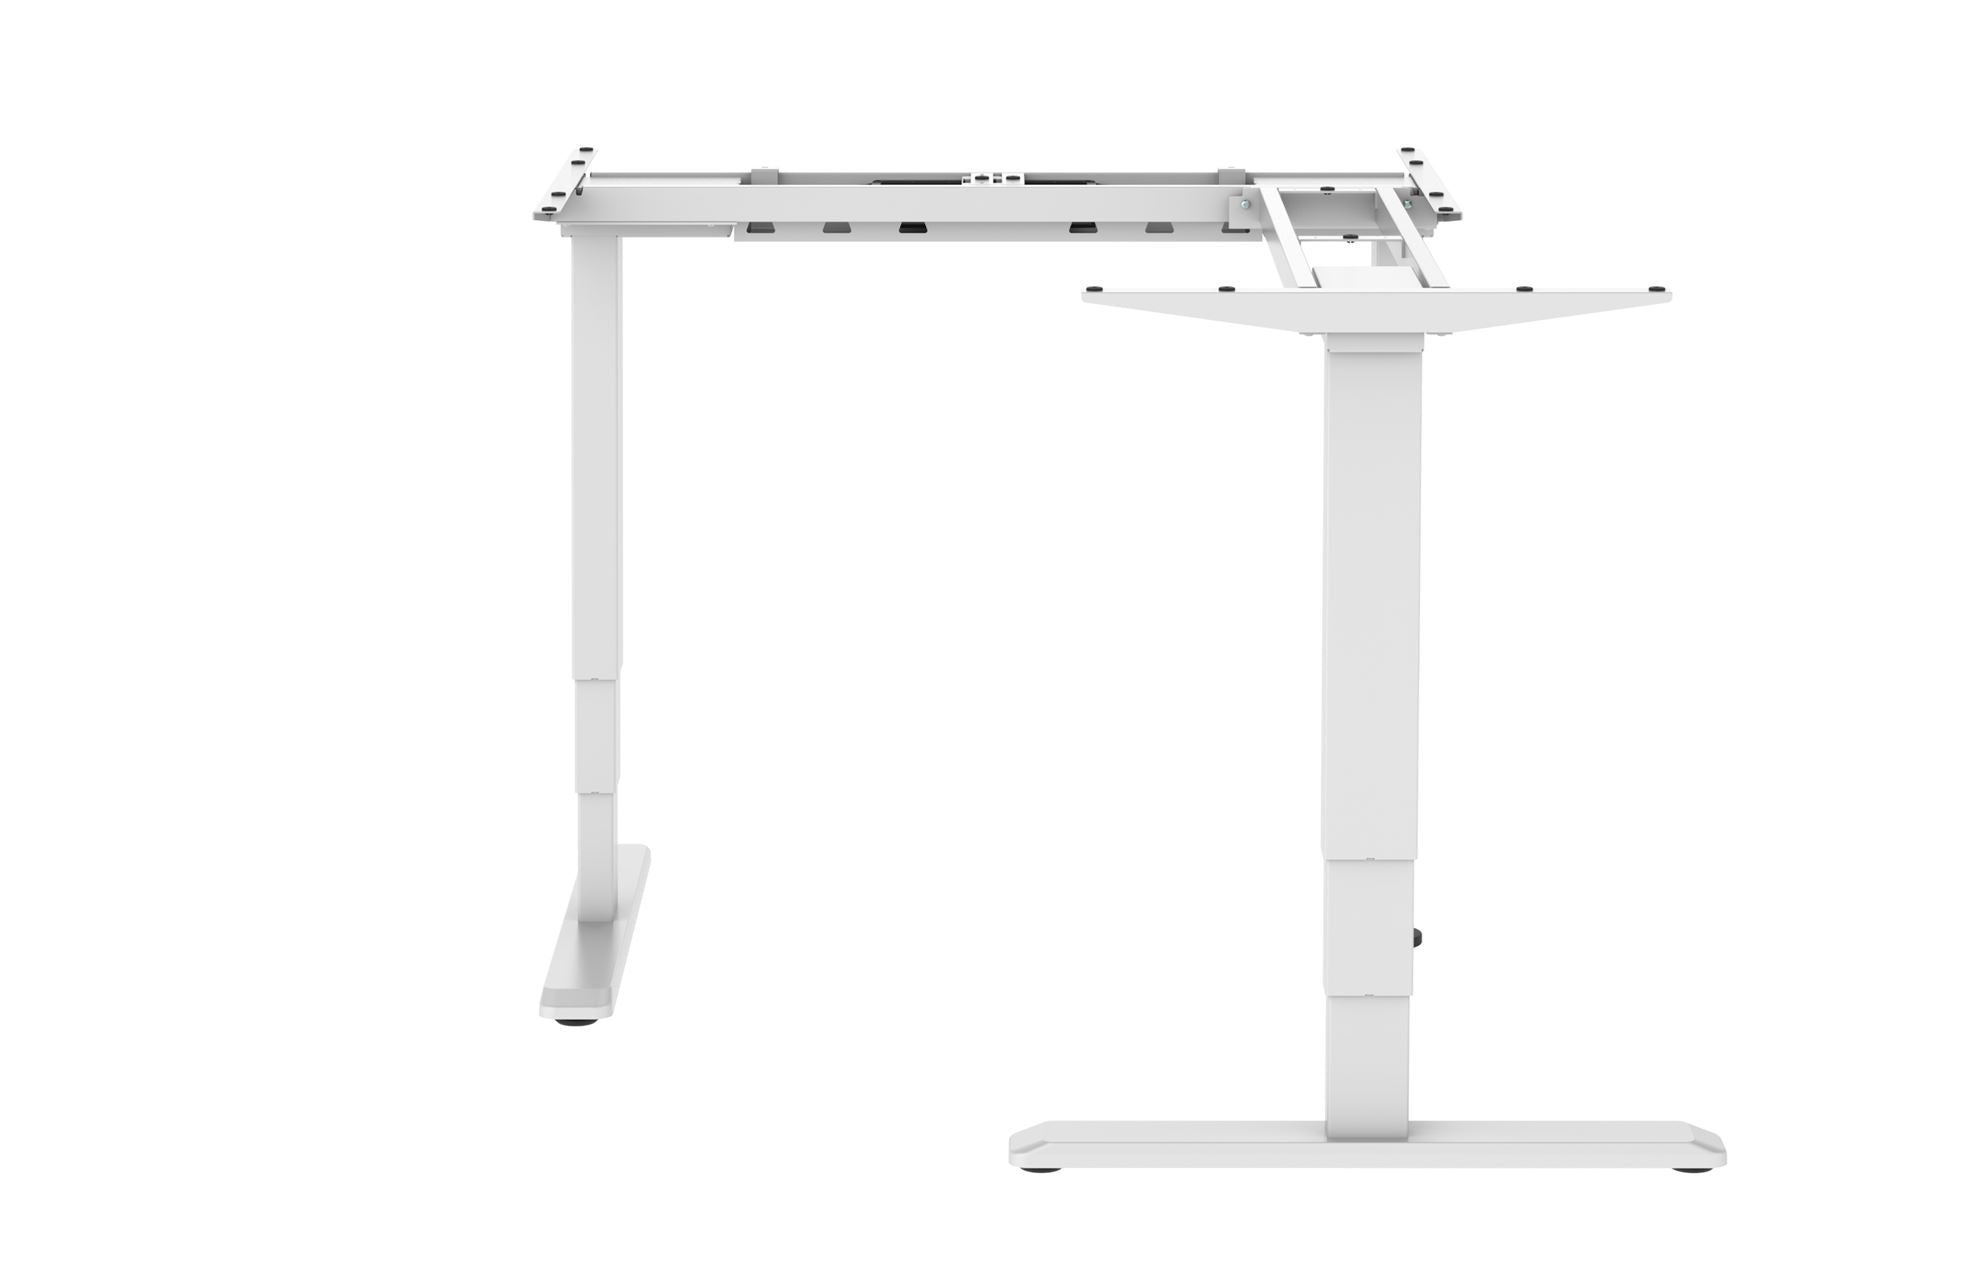 BRATECK_L-Shape_Electric_Sit-Stand_Desk_Frame_with_Triple_Motors._Programmable_Height_Range_620-_1280mm._Touch_Control_Panel._Max_Weight_150Kgs._White_Colour._*Desk_Top_Purchased_Separately*